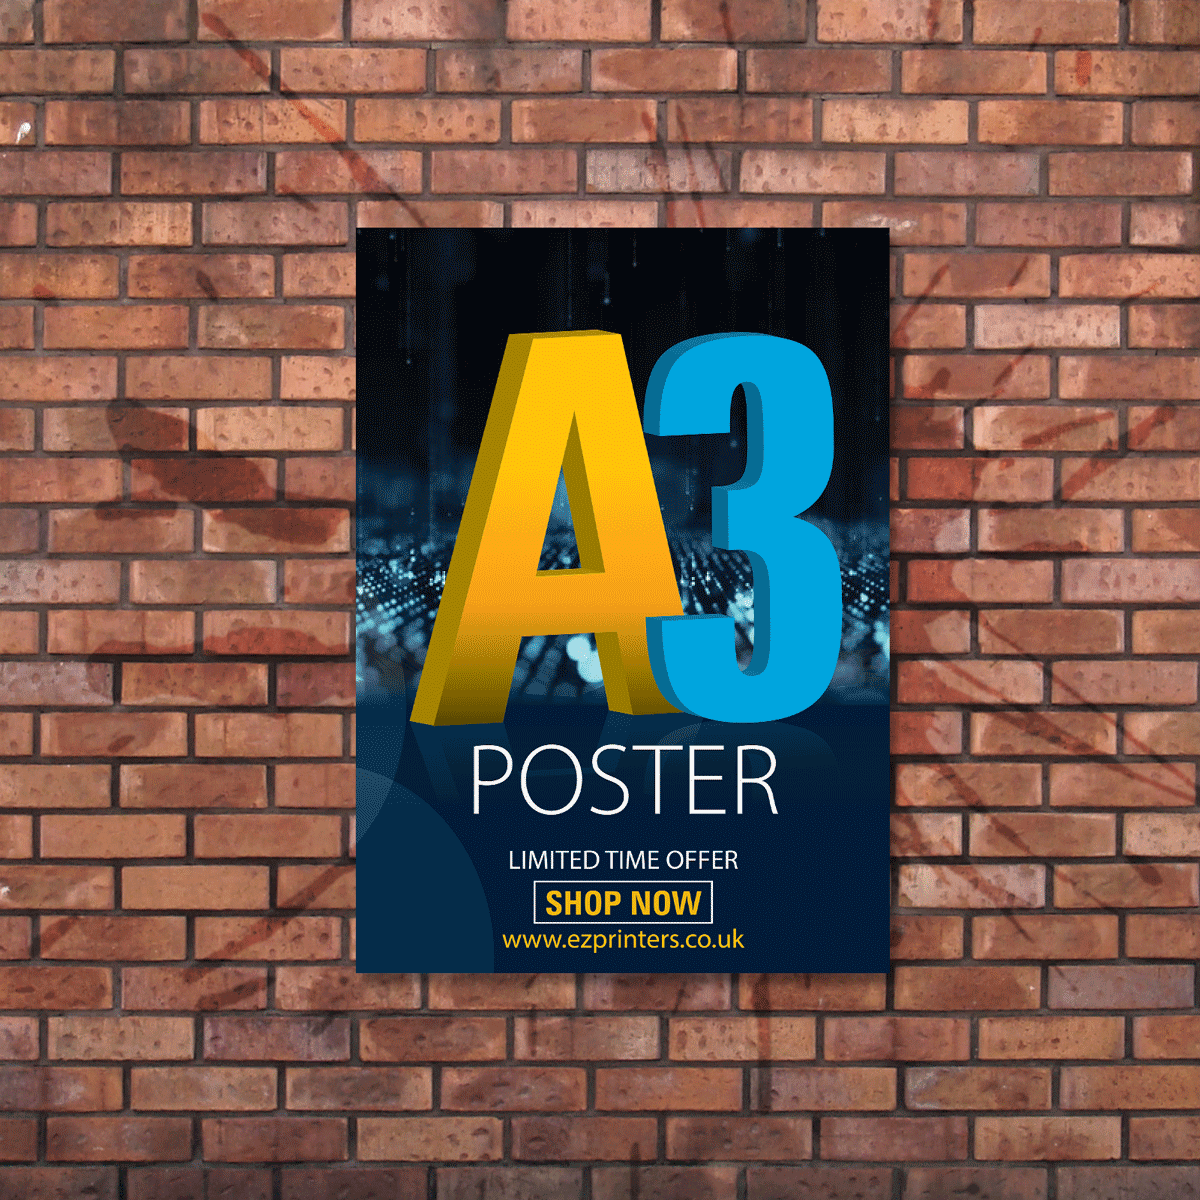 cheap_instant_last_minute_quality_hi_gloss_a3_poster_printing_shop_in_east_london_shoreditch_bricklane